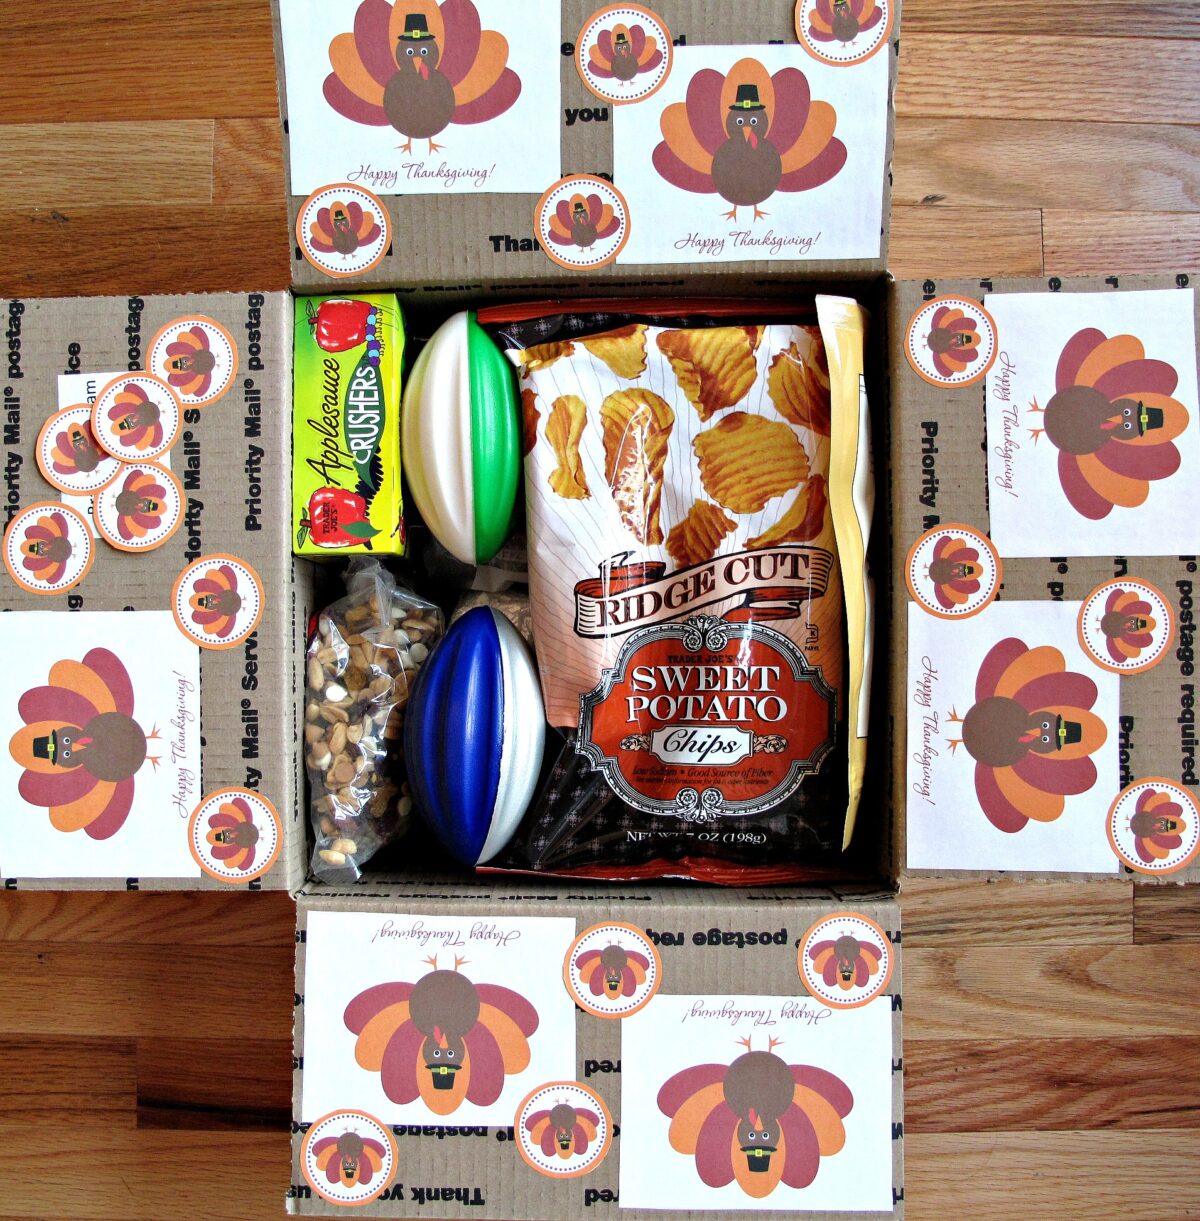 Thanksgiving Military Care Package decorated with turkey illustrations and filled with snacks.